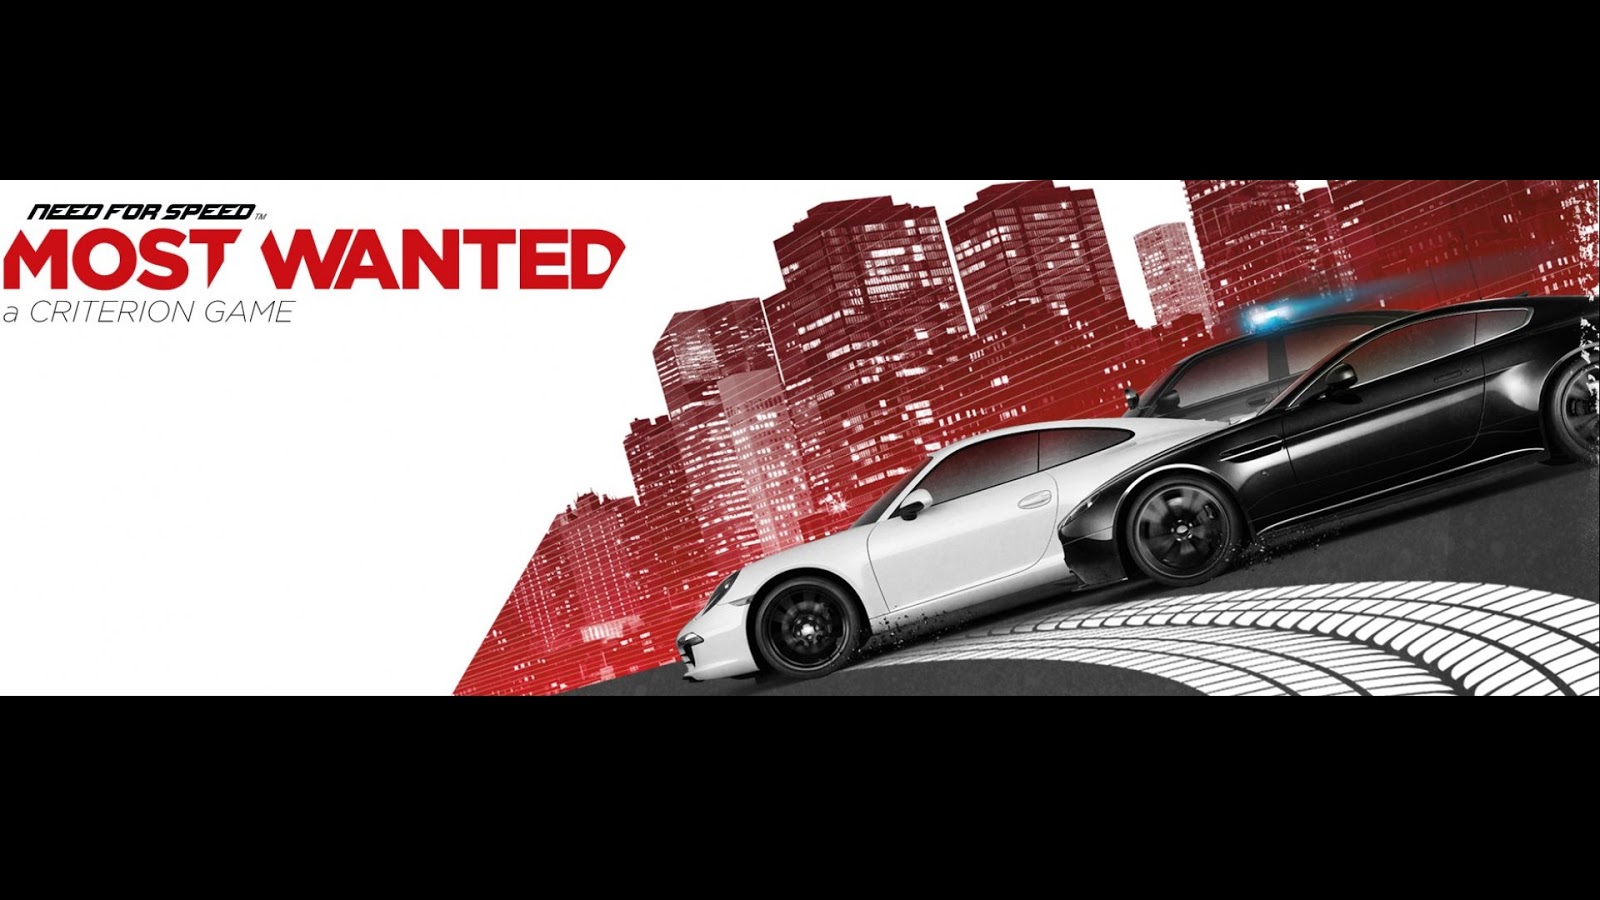 need for speed most wanted v2 trainer